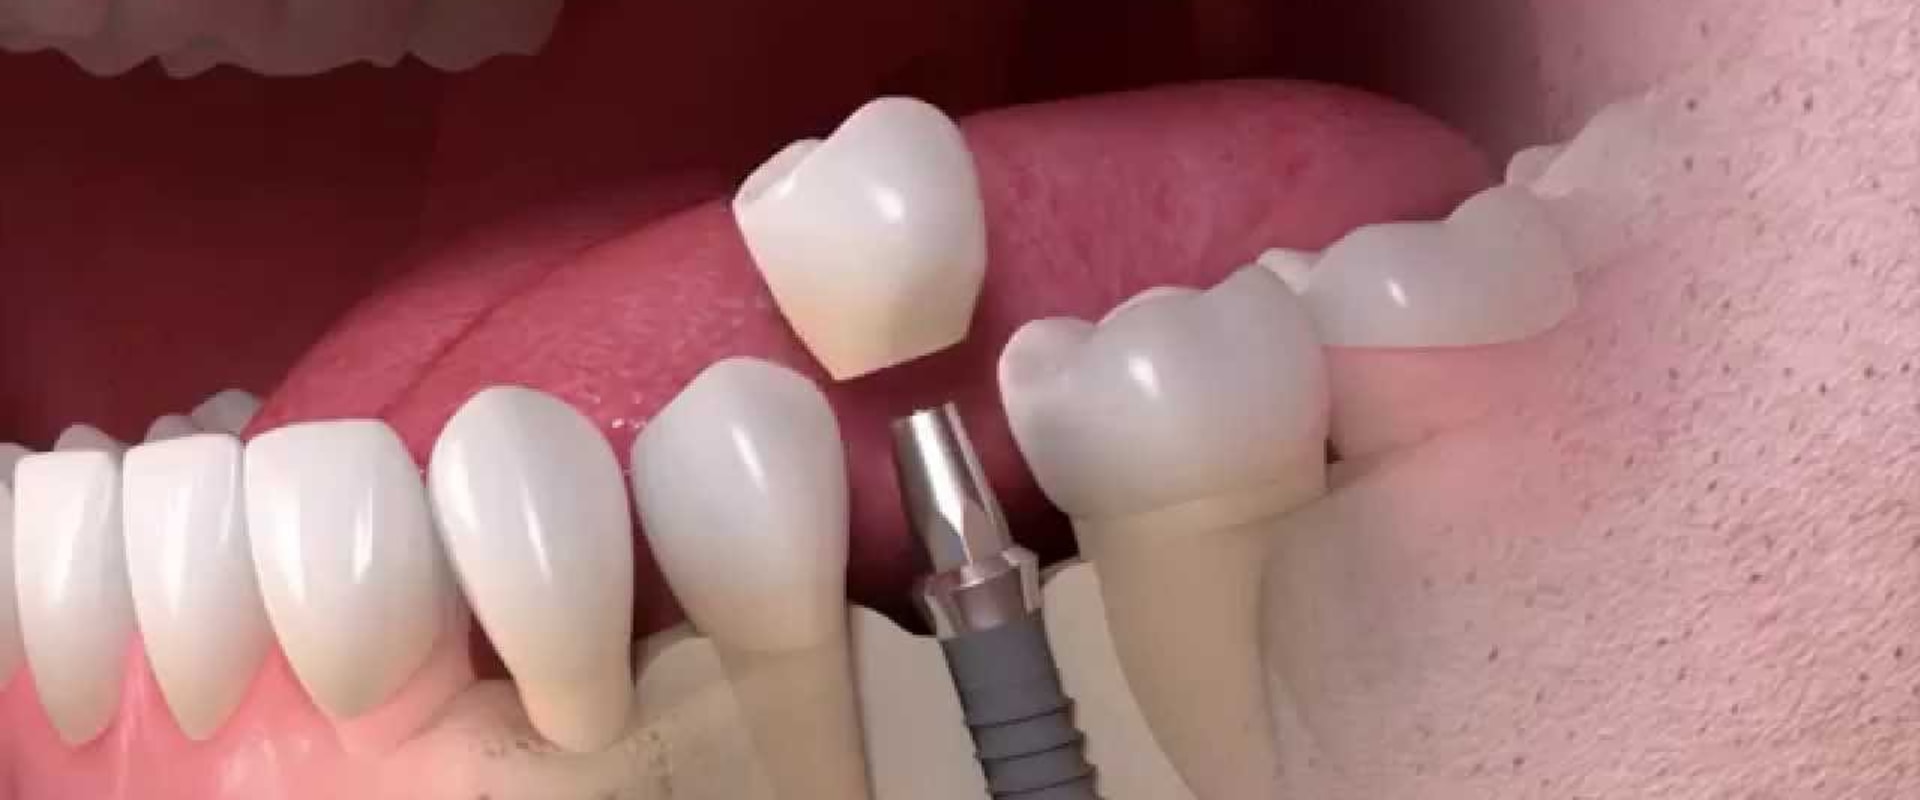 Where are dental implants the cheapest?